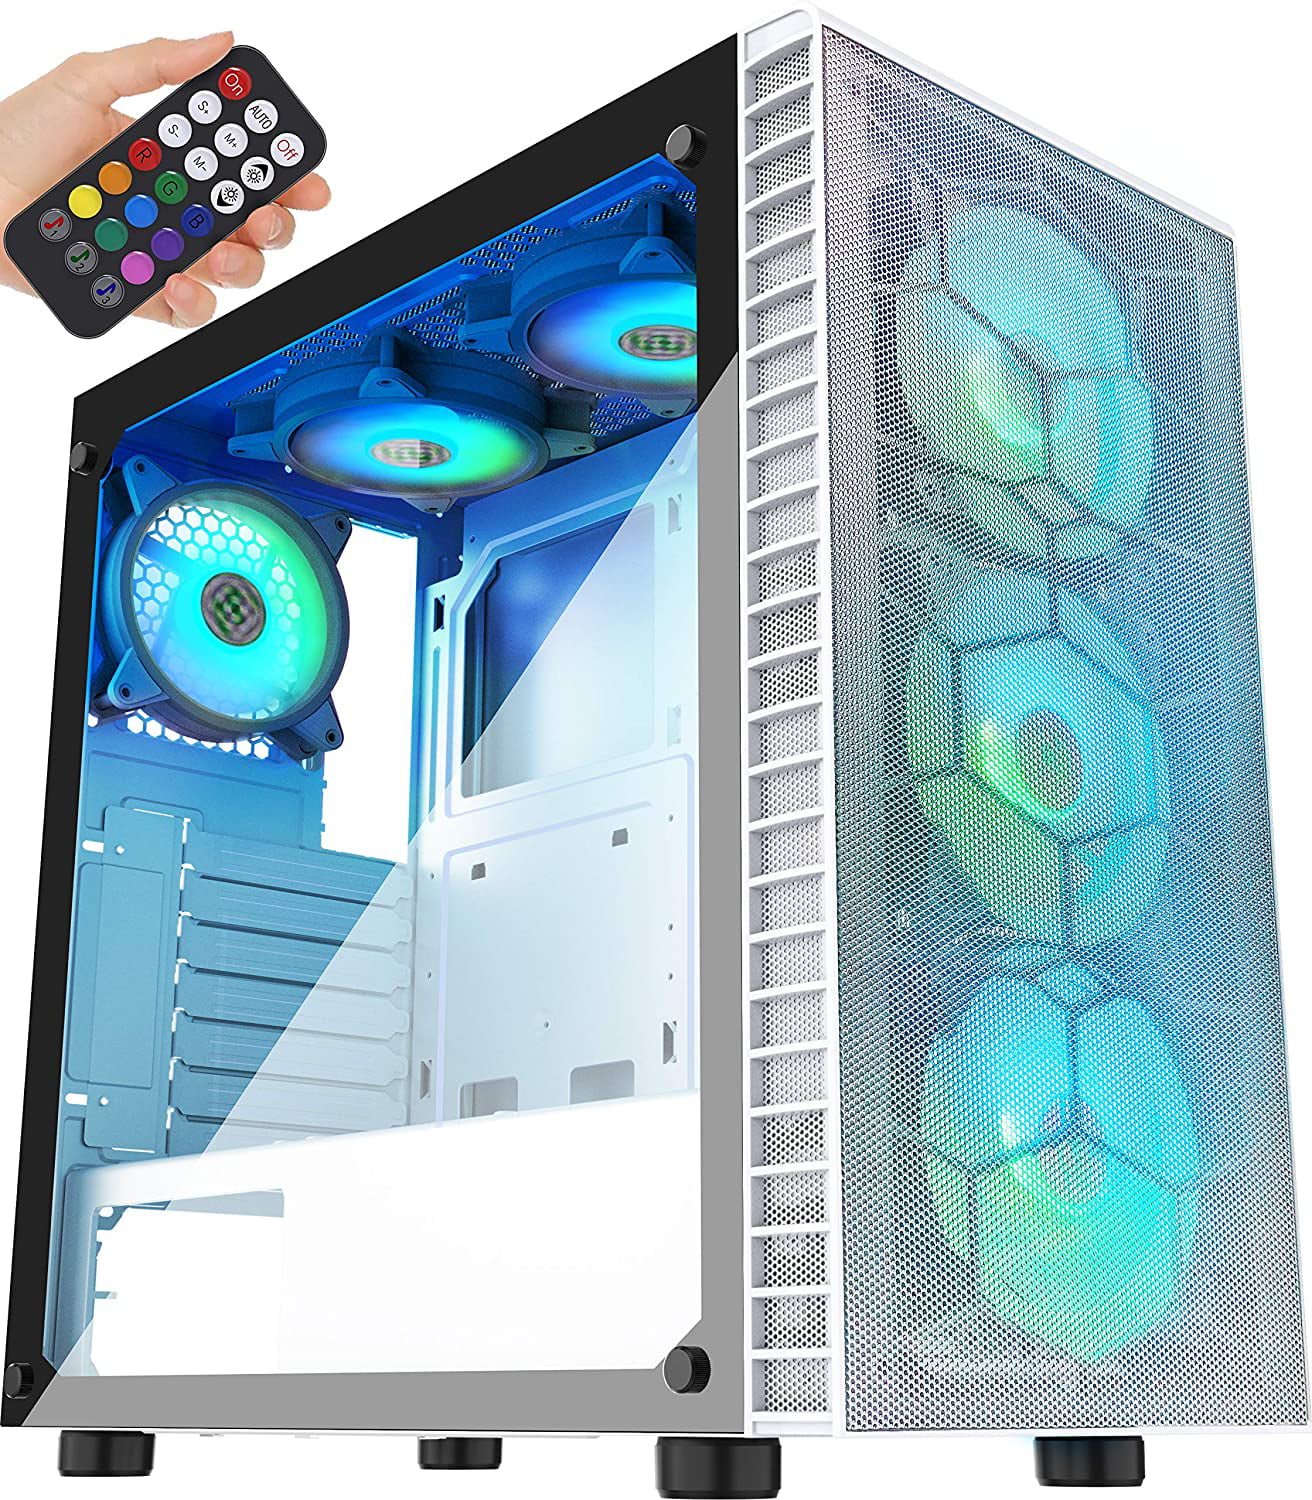 Micro ATX Computer Case Mini Tower Gaming Desktop PC with USB 3.0 120mm Fan 